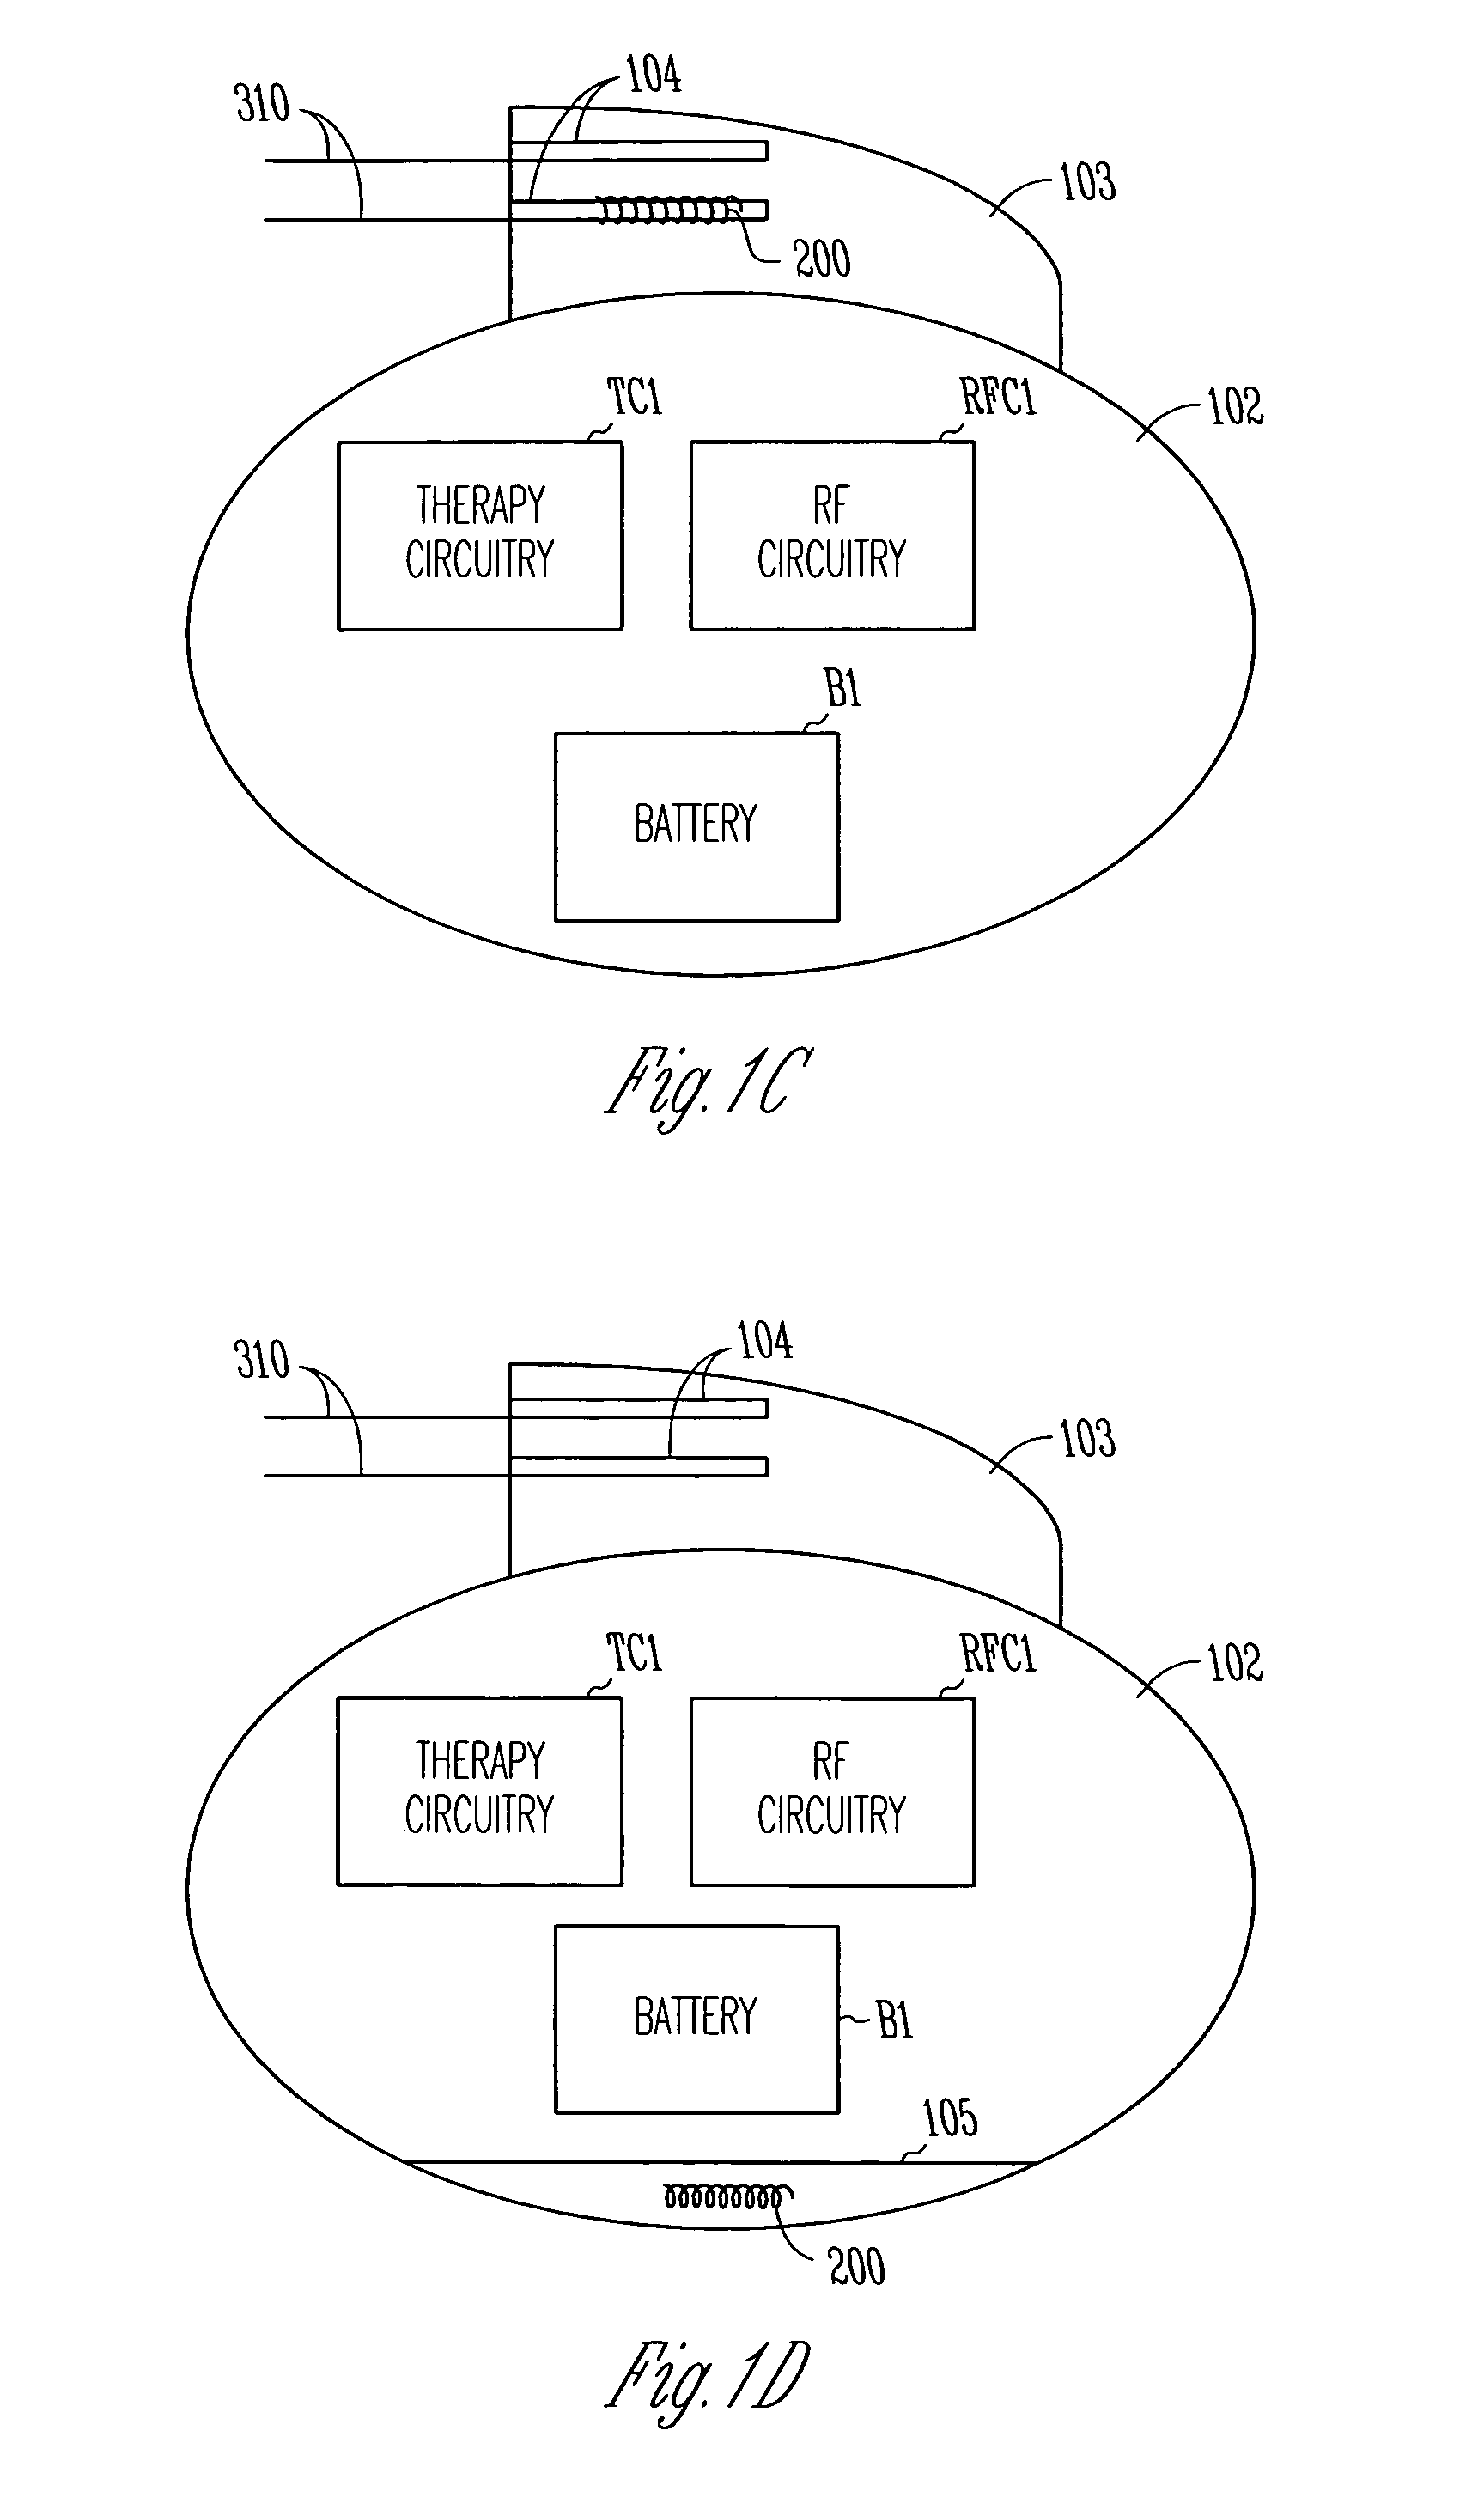 Antenna for an implantable medical device